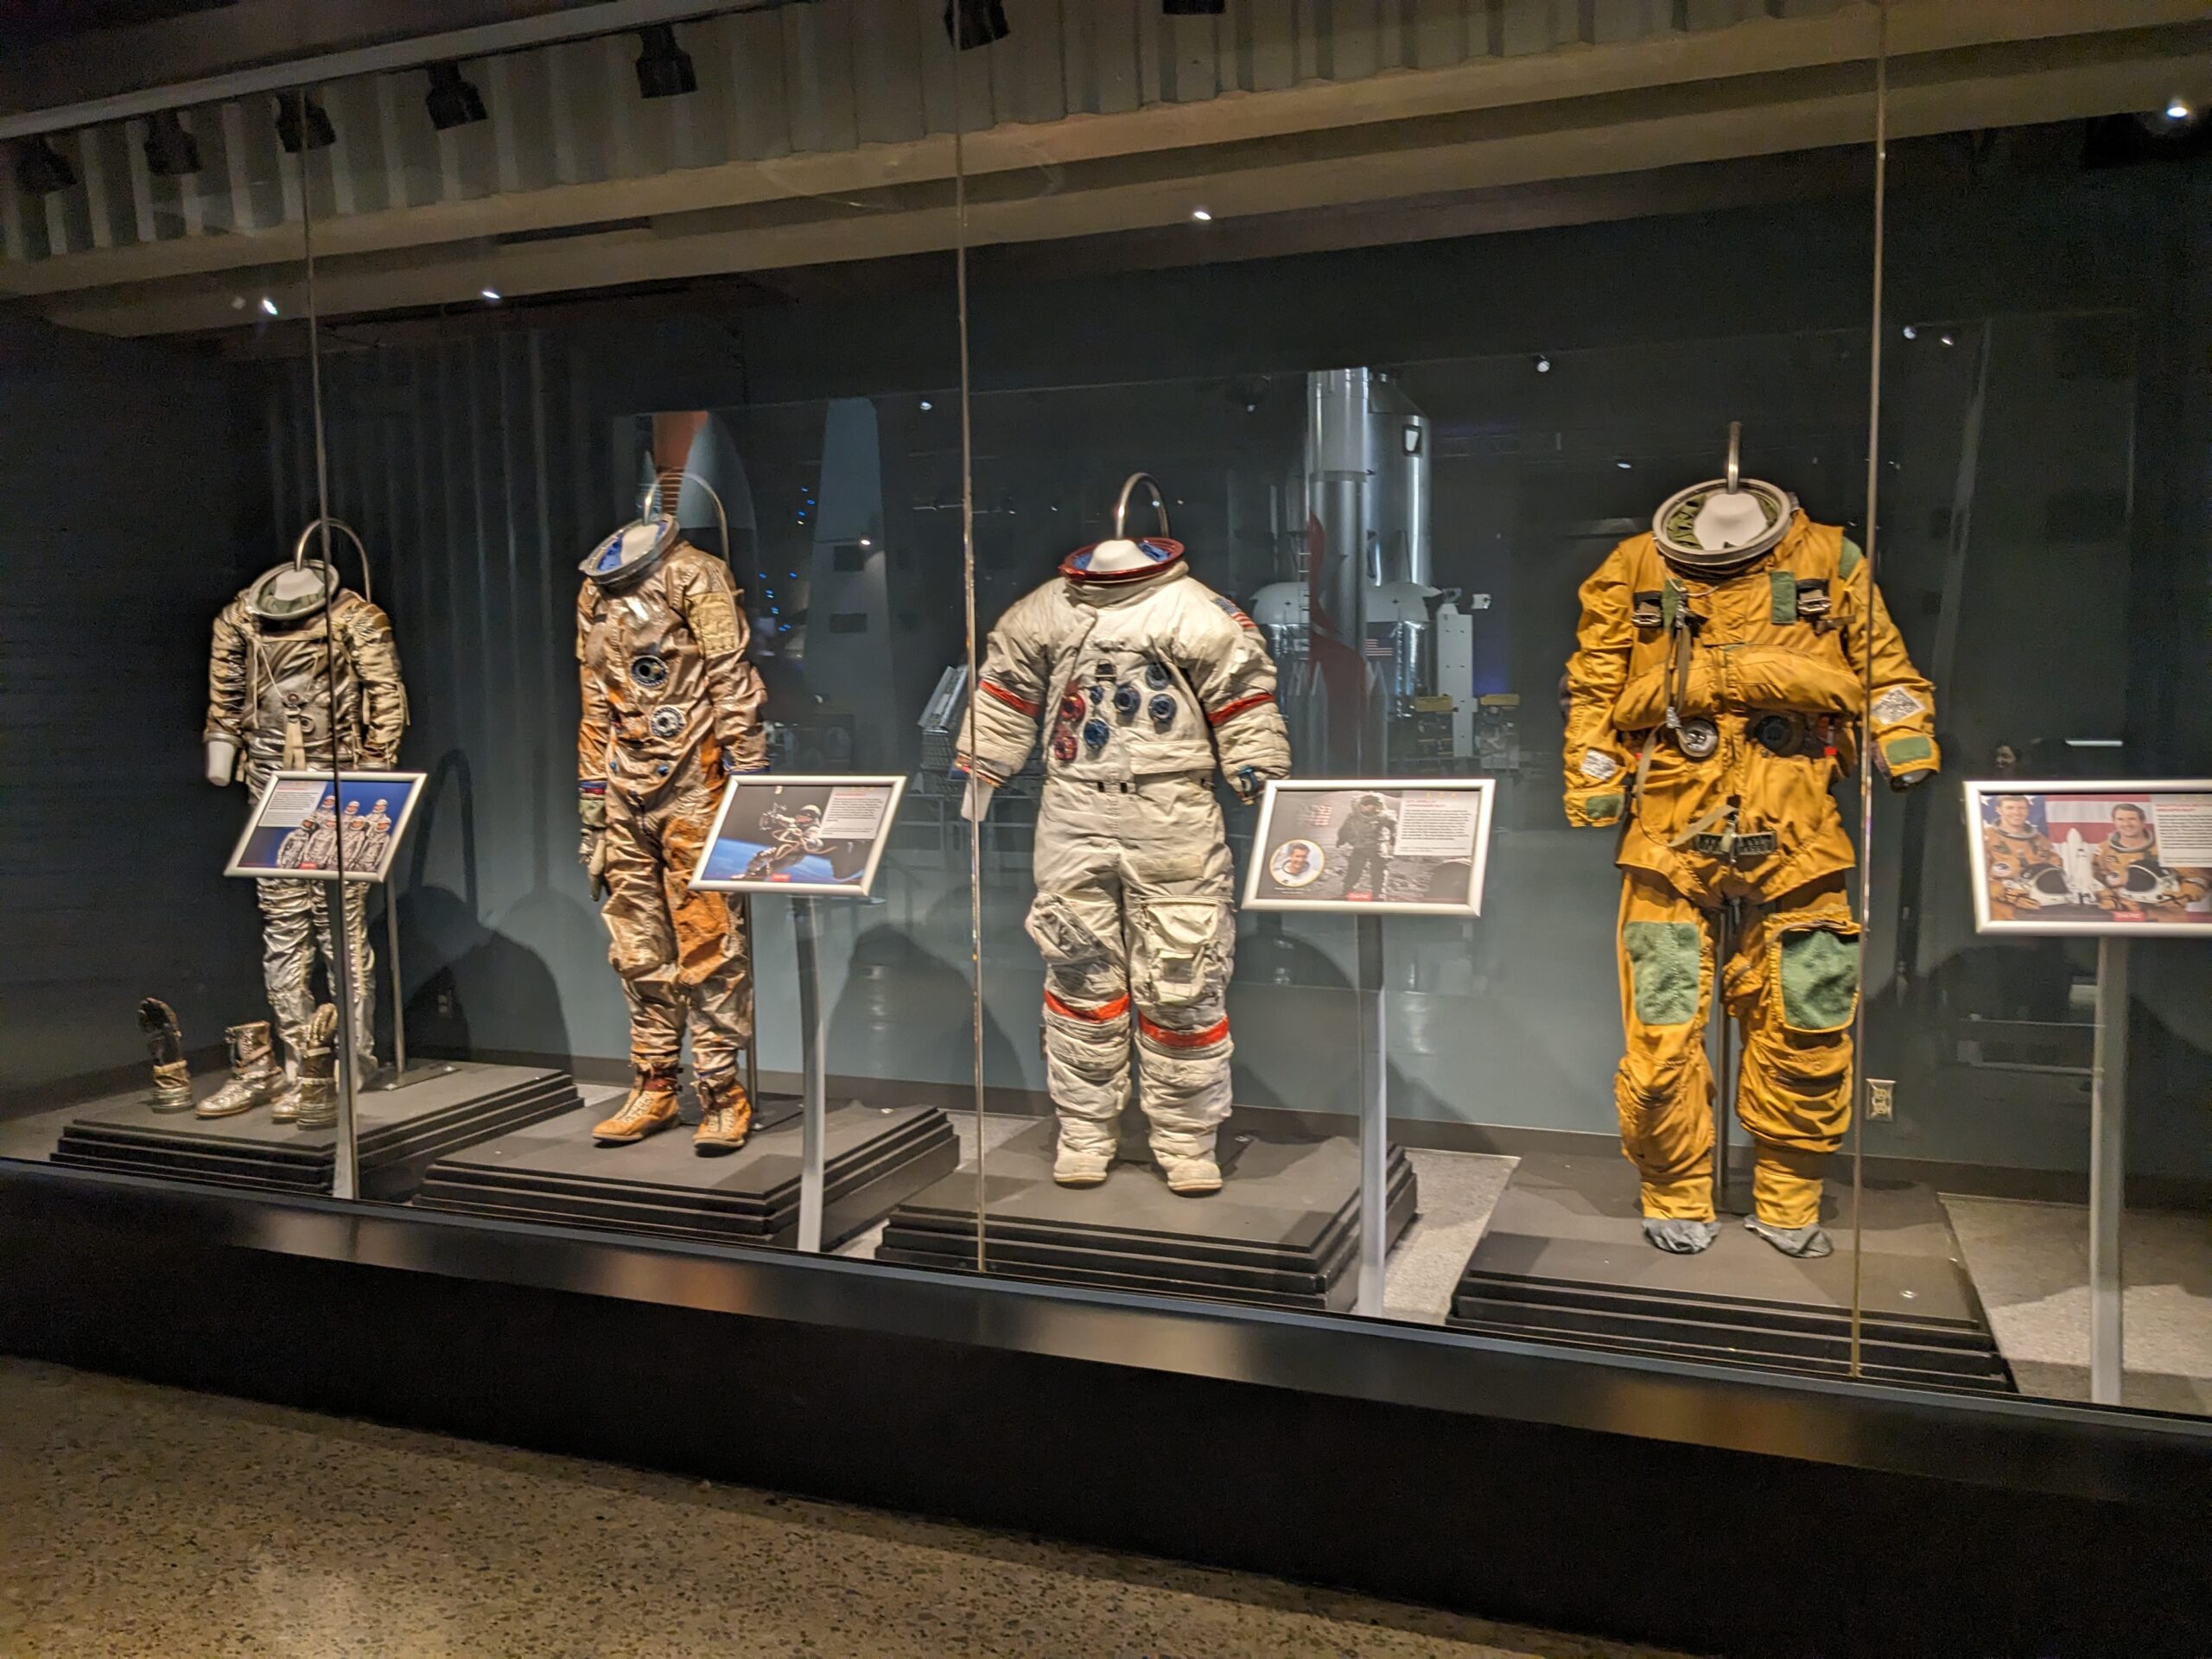 Space suits through the years